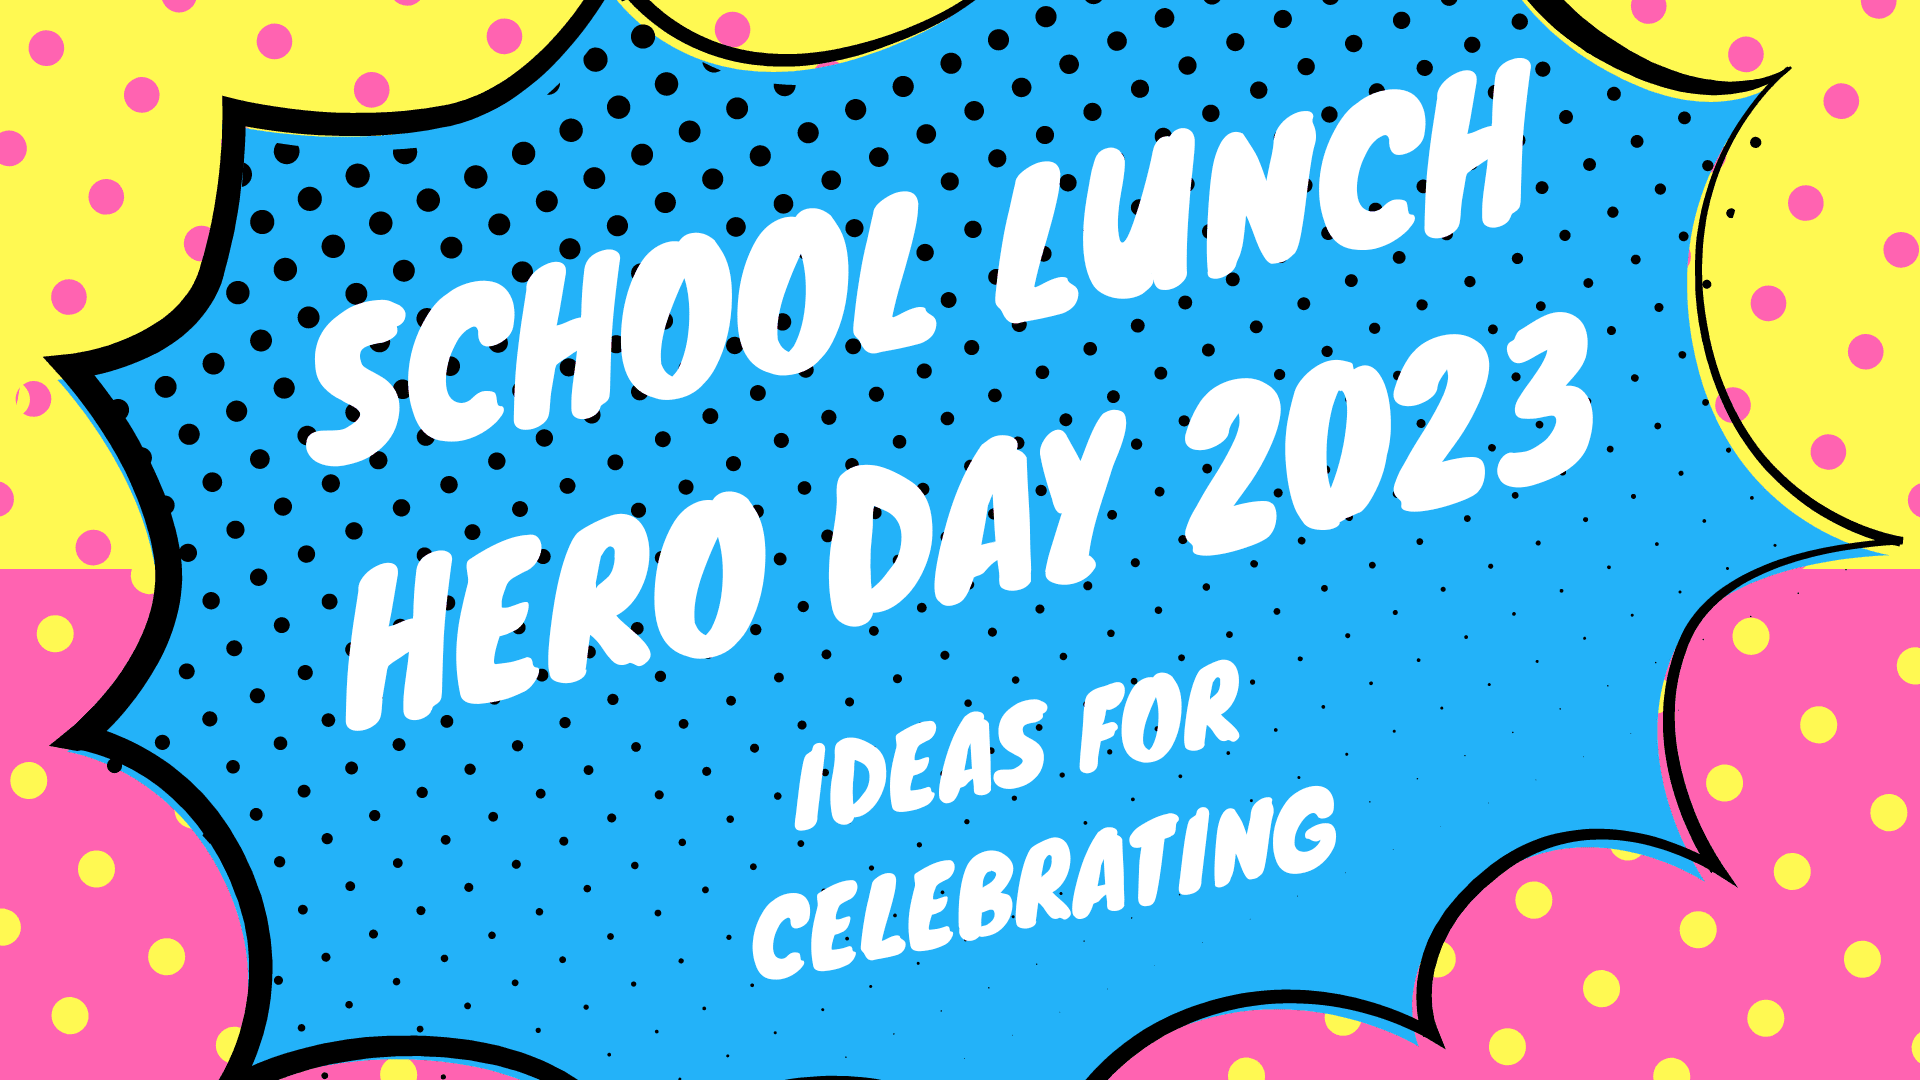 School Lunch Hero Day 2023 Ideas for Celebrating